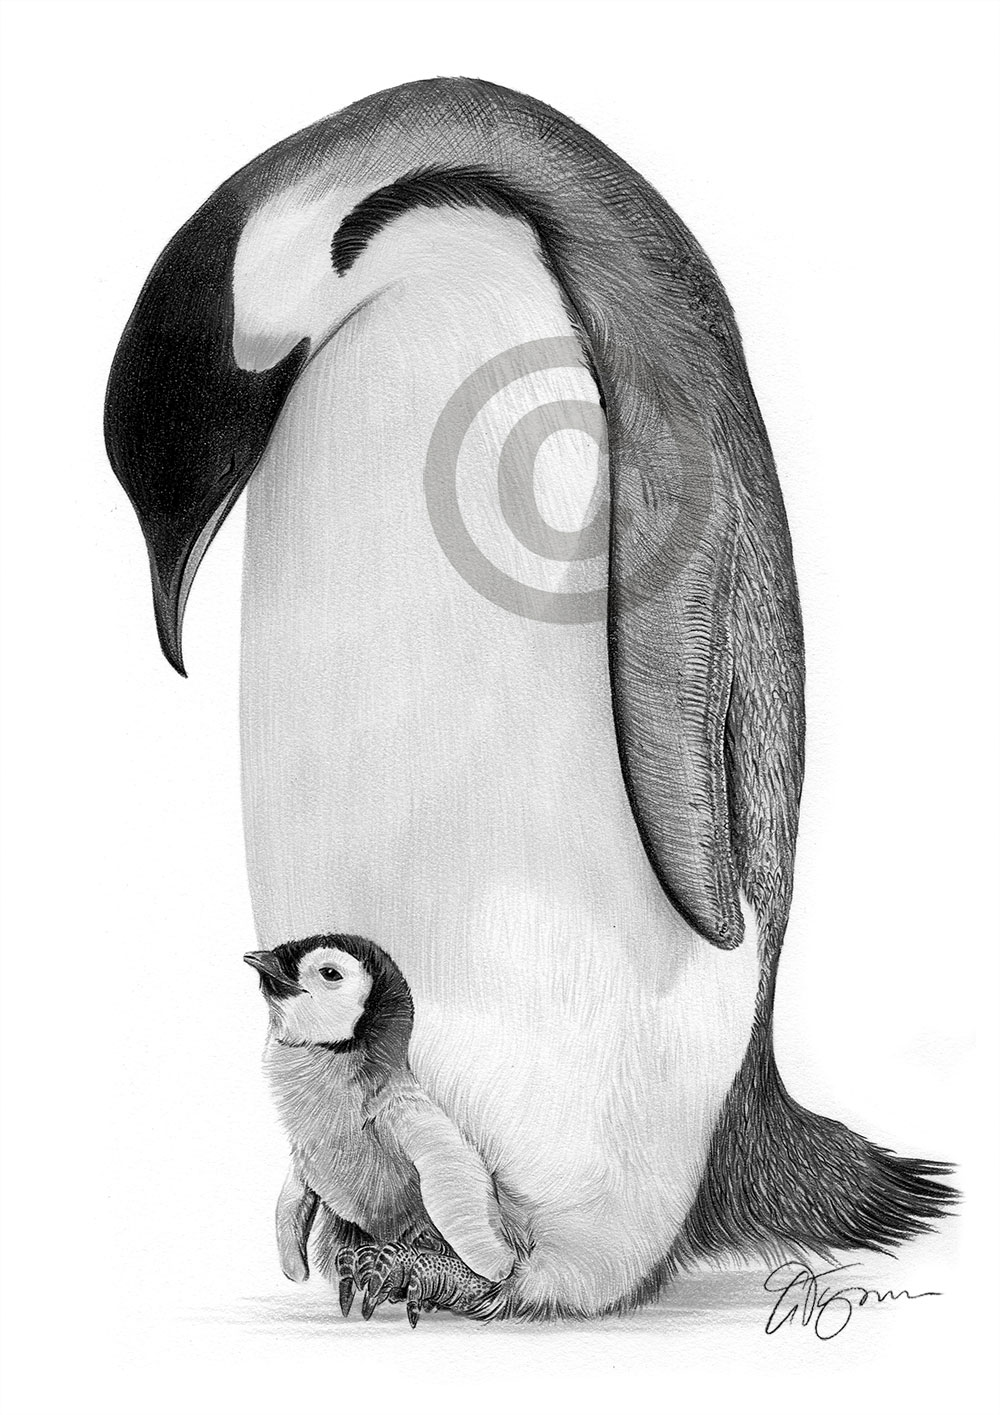 Pencil drawing of an emperor penguin by artist Gary Tymon